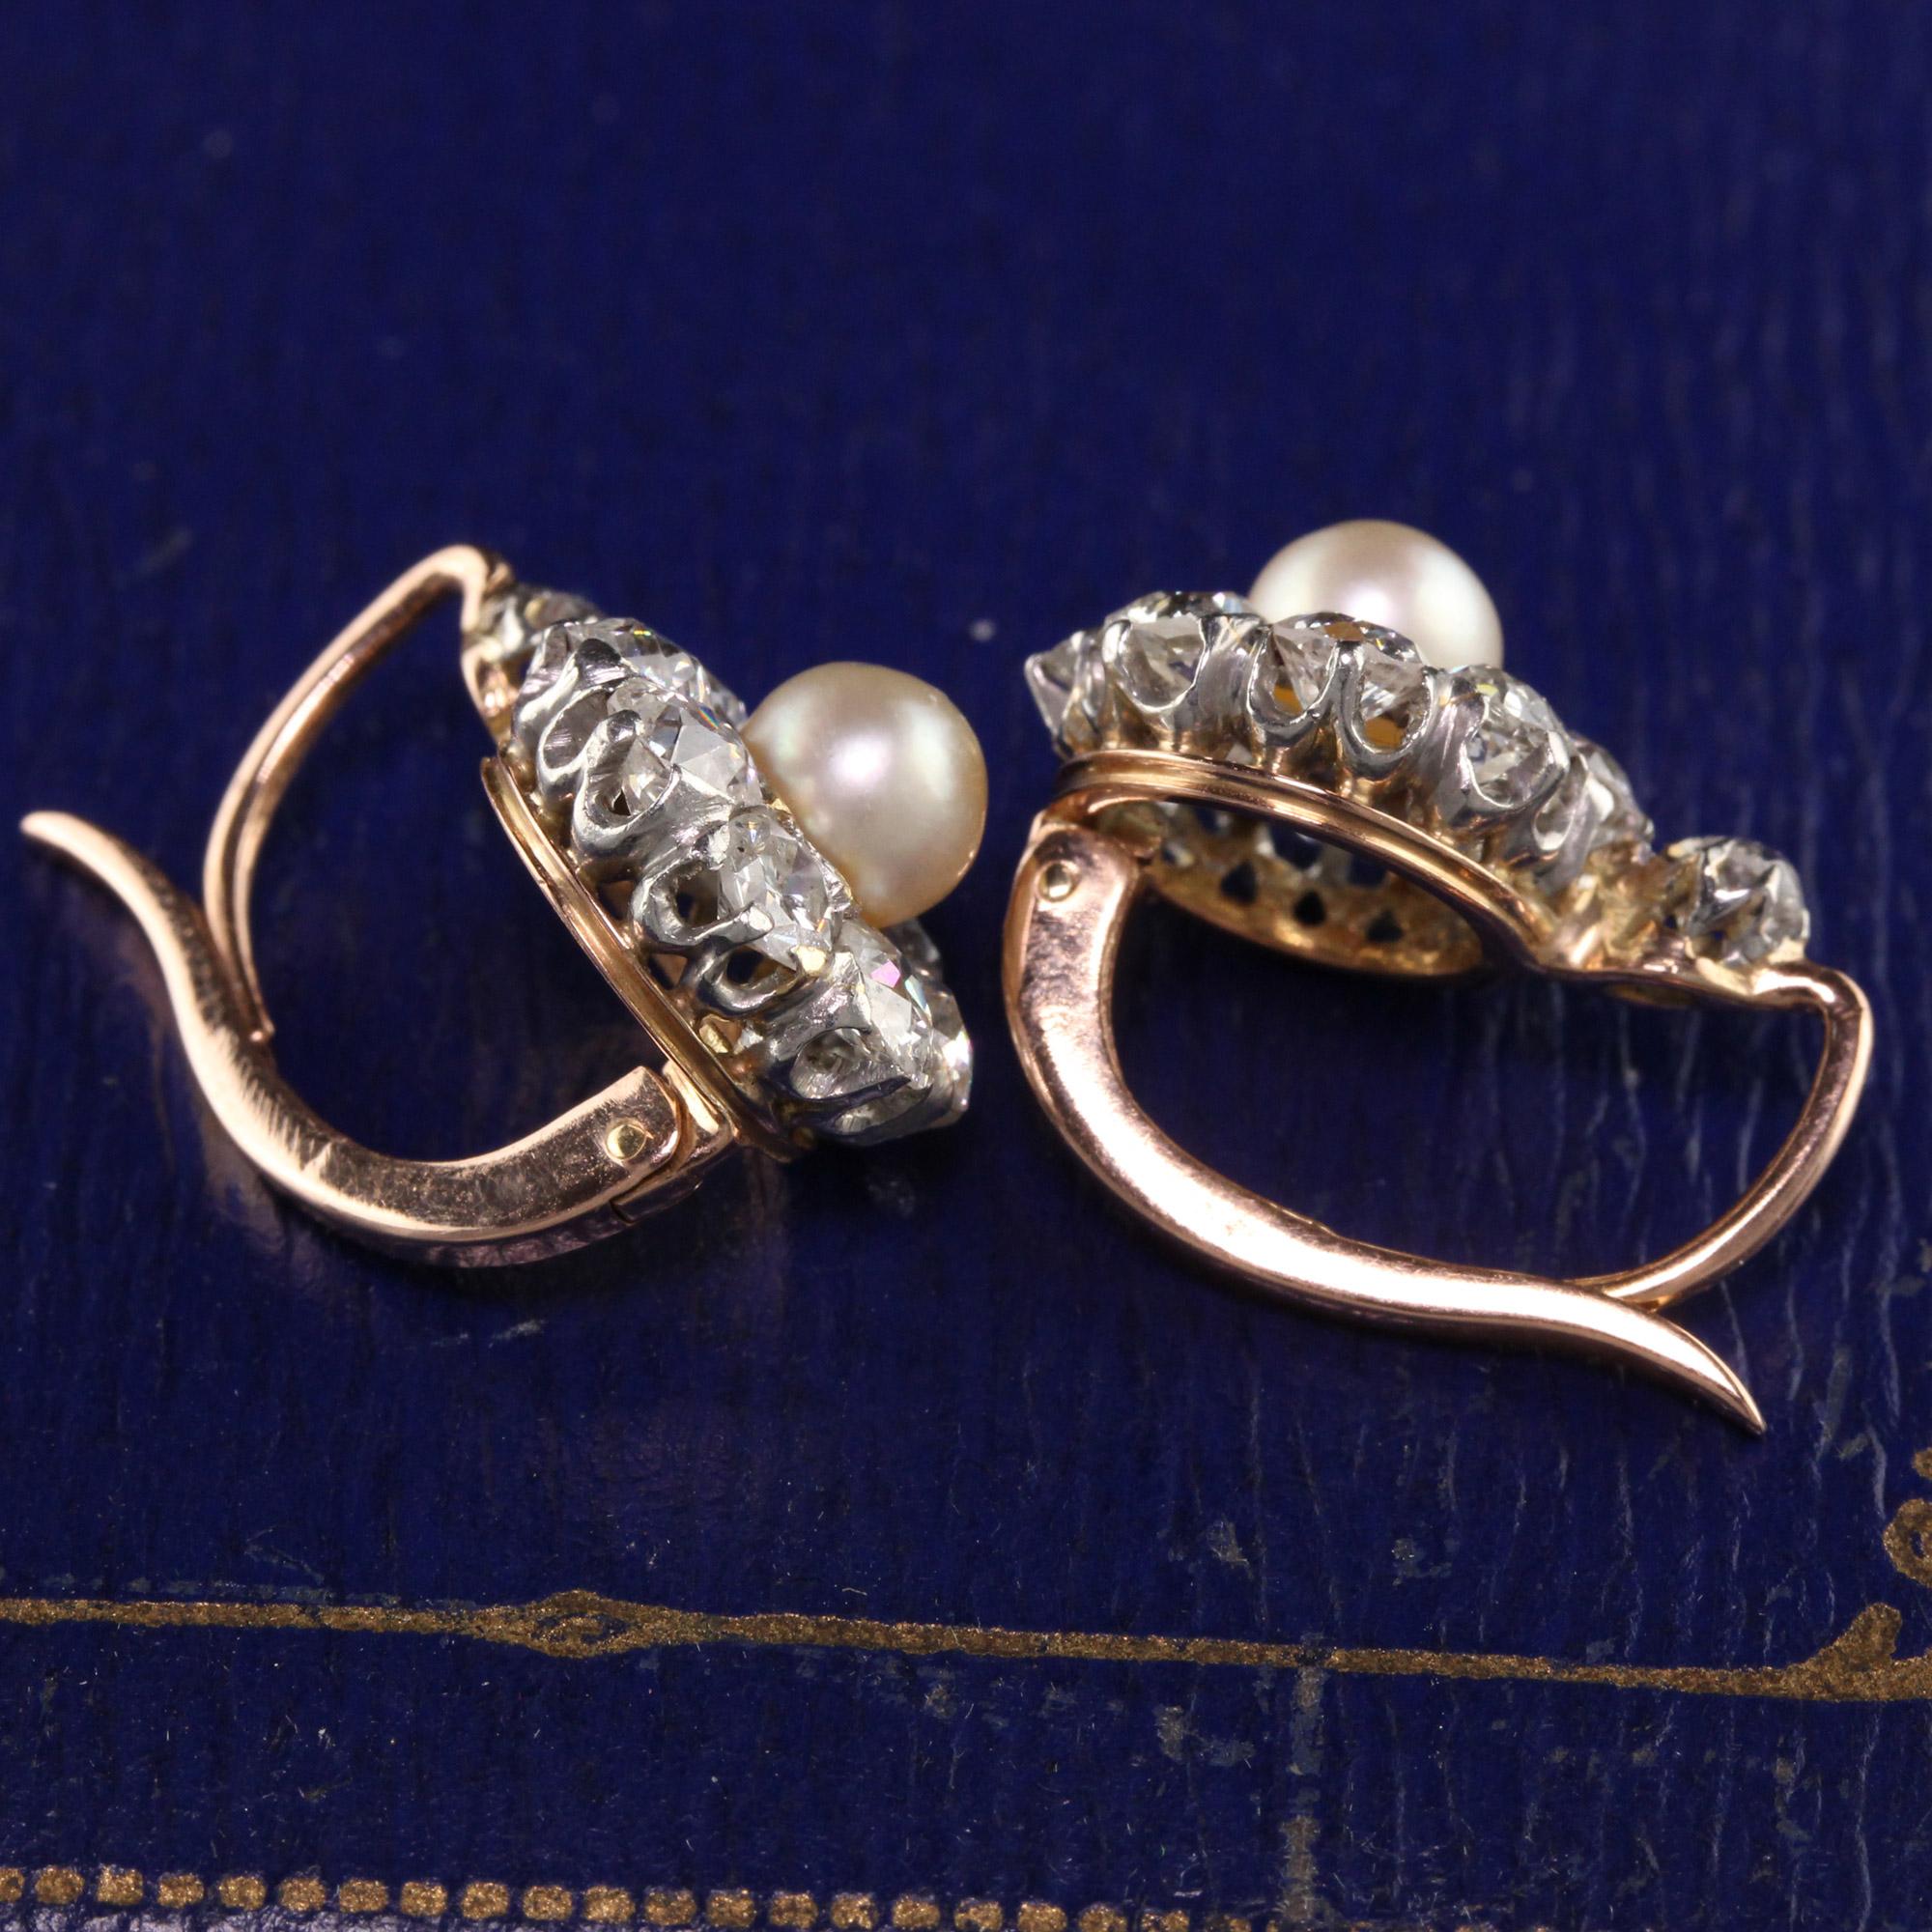 Gorgeous Antique Victorian 18K Rose Gold Platinum Top Old Mine Diamond and Pearl Earrings. These amazing victorian diamond earrings have old mine cut diamonds surrounding a natural pearl on each side. This is a gorgeous and classic style.

Item